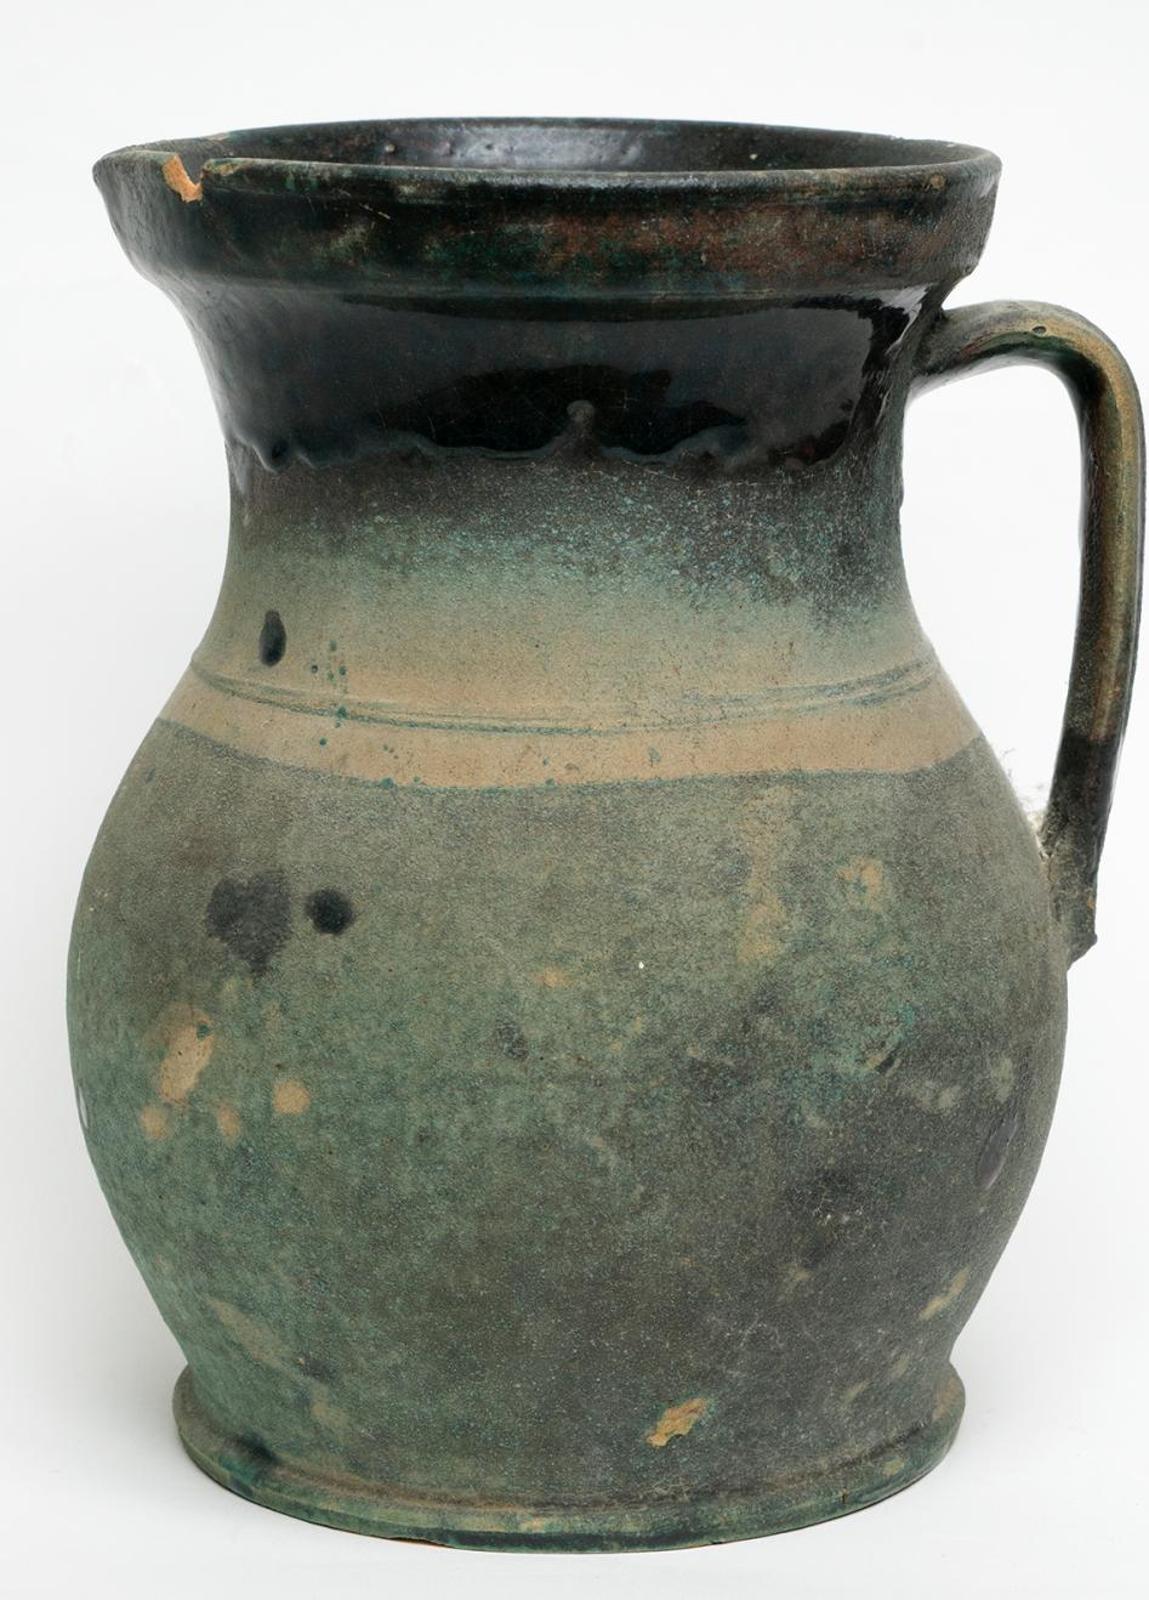 Peter Rupchan (1883-1944) - Pitcher With Spout With Dark Green Glaze